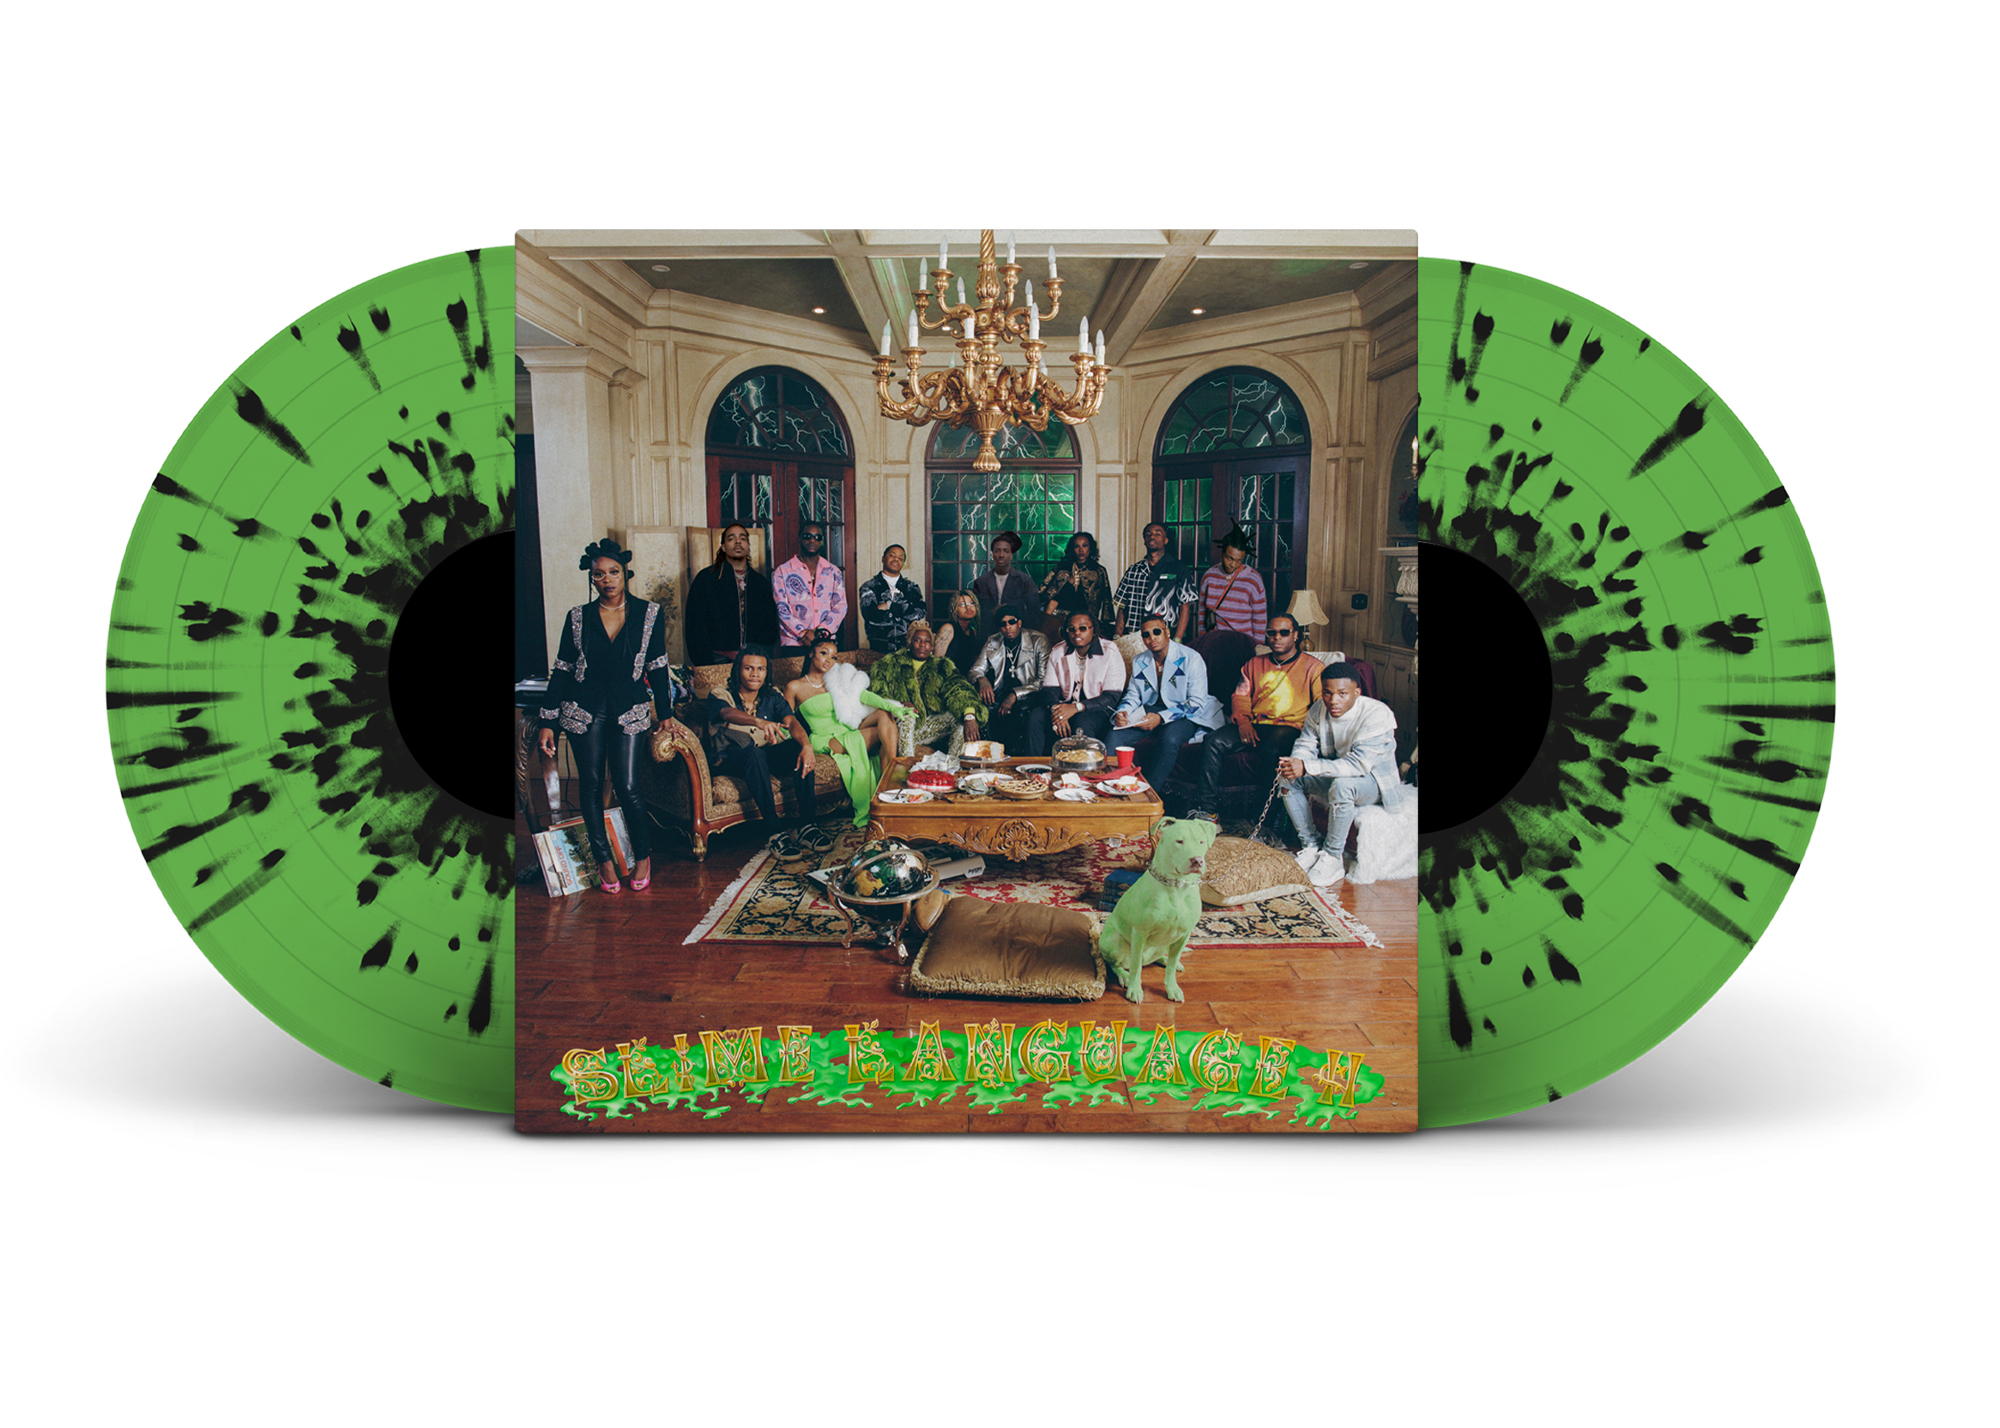 Young Thug Slime Language 2 Limited Edition 2XLP Vinyl Slime